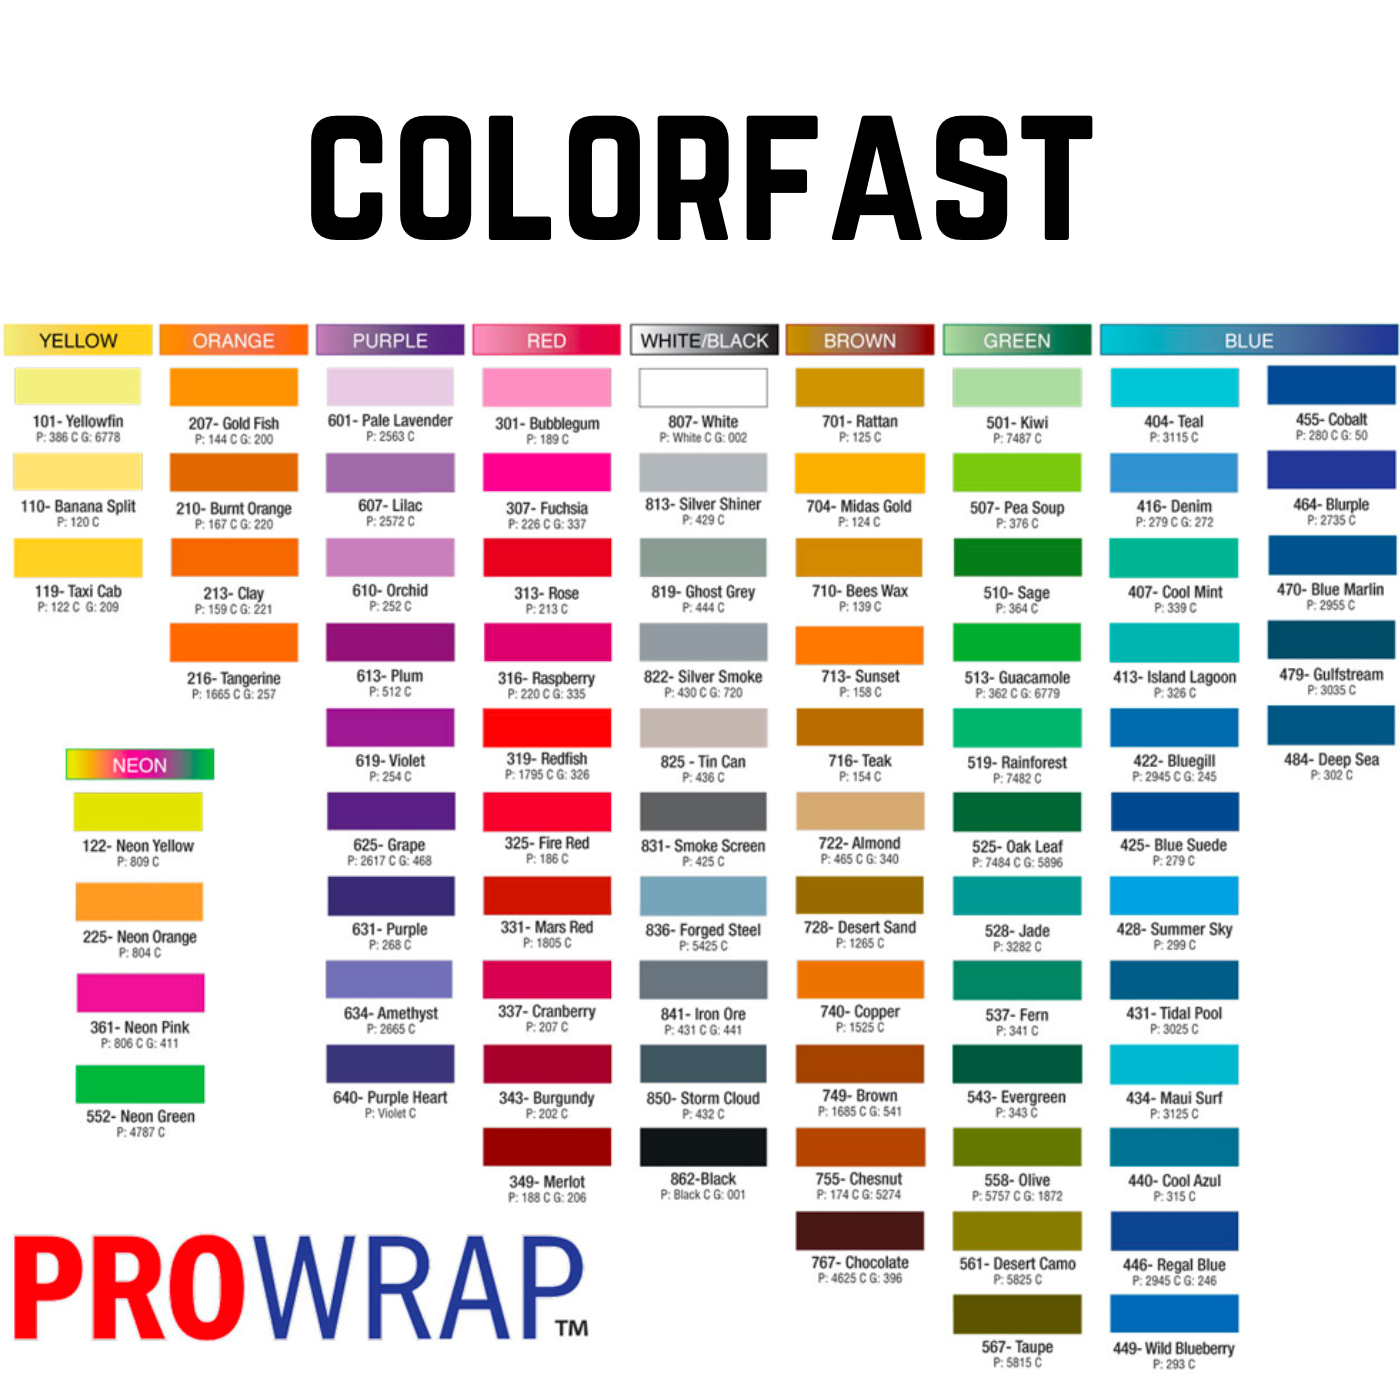 Prowrap Guide Thread (Size D)